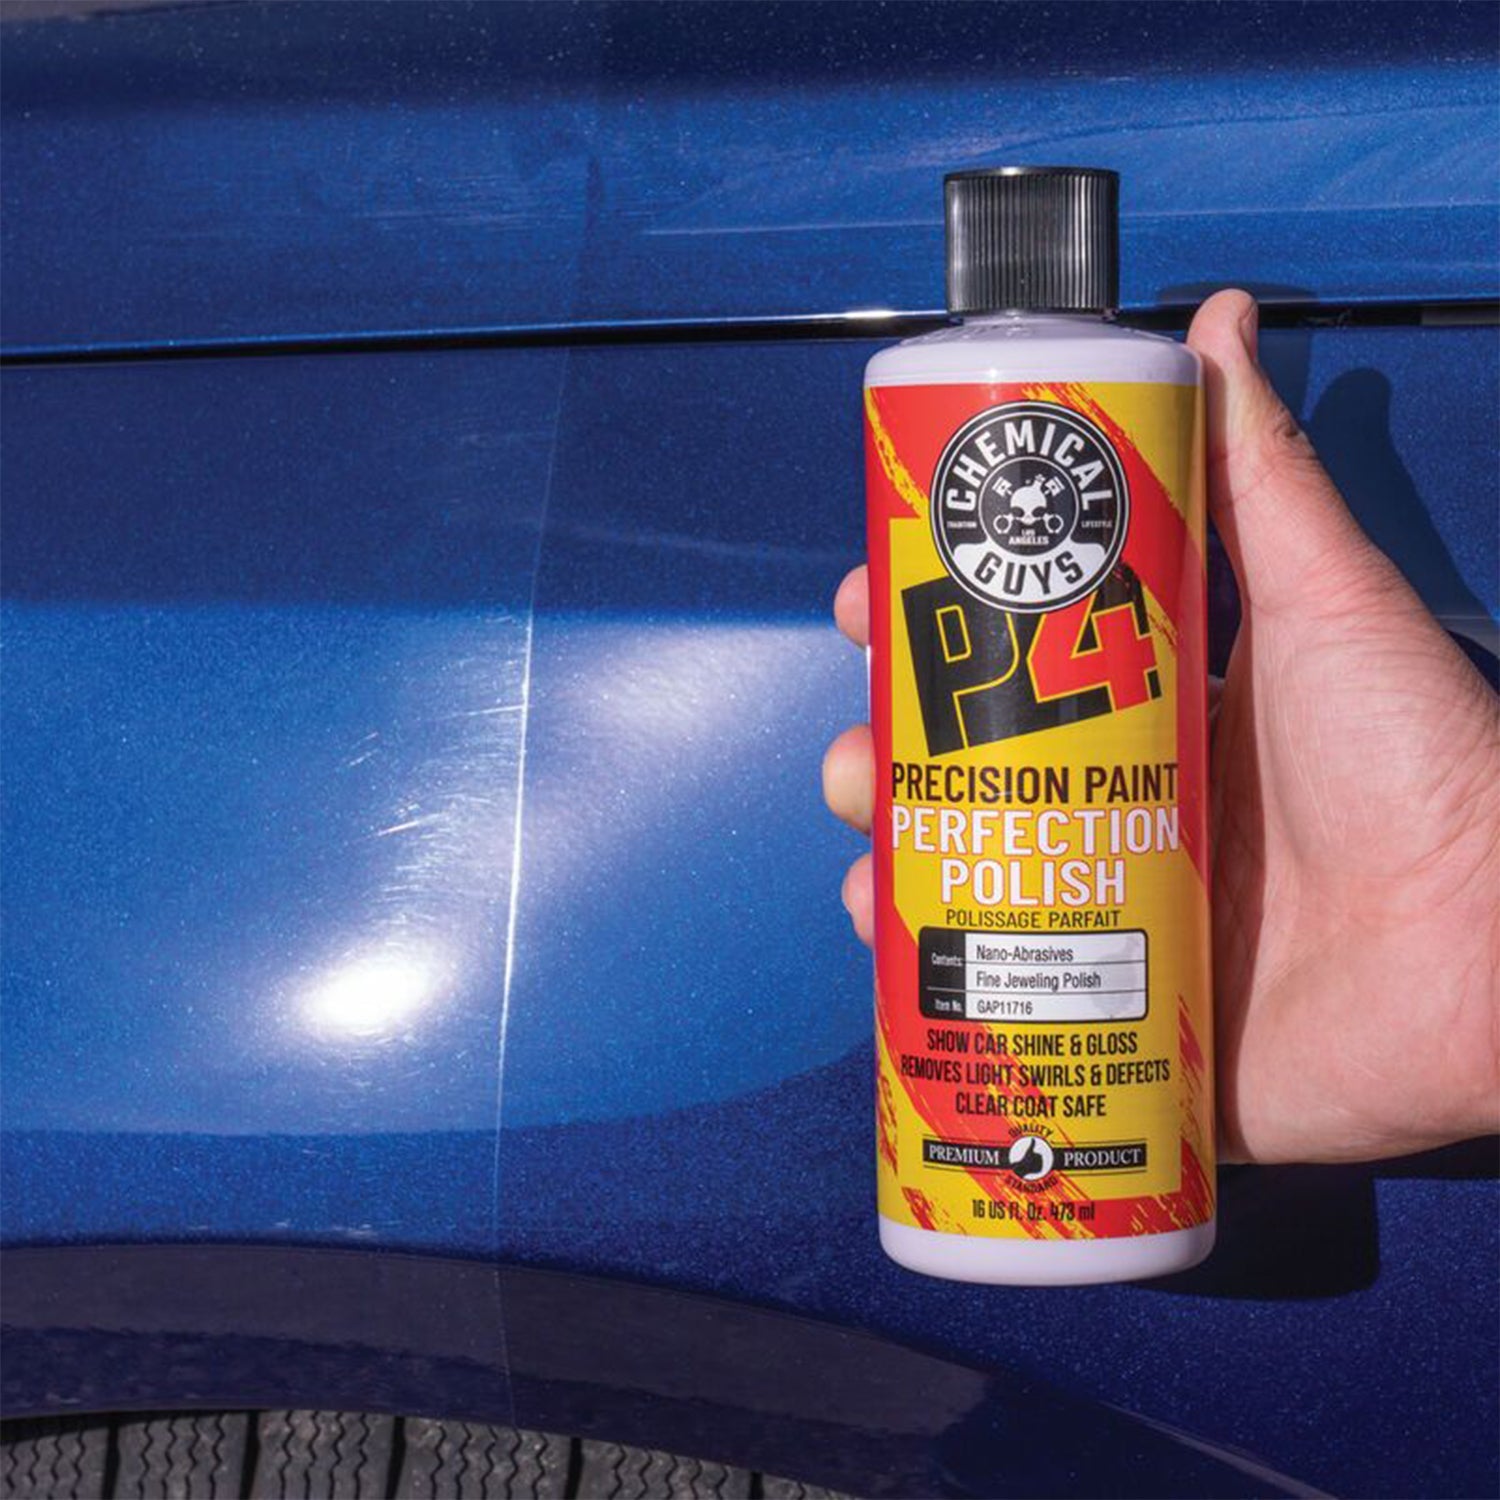 Chemical Guys Leather Conditioner 450ml